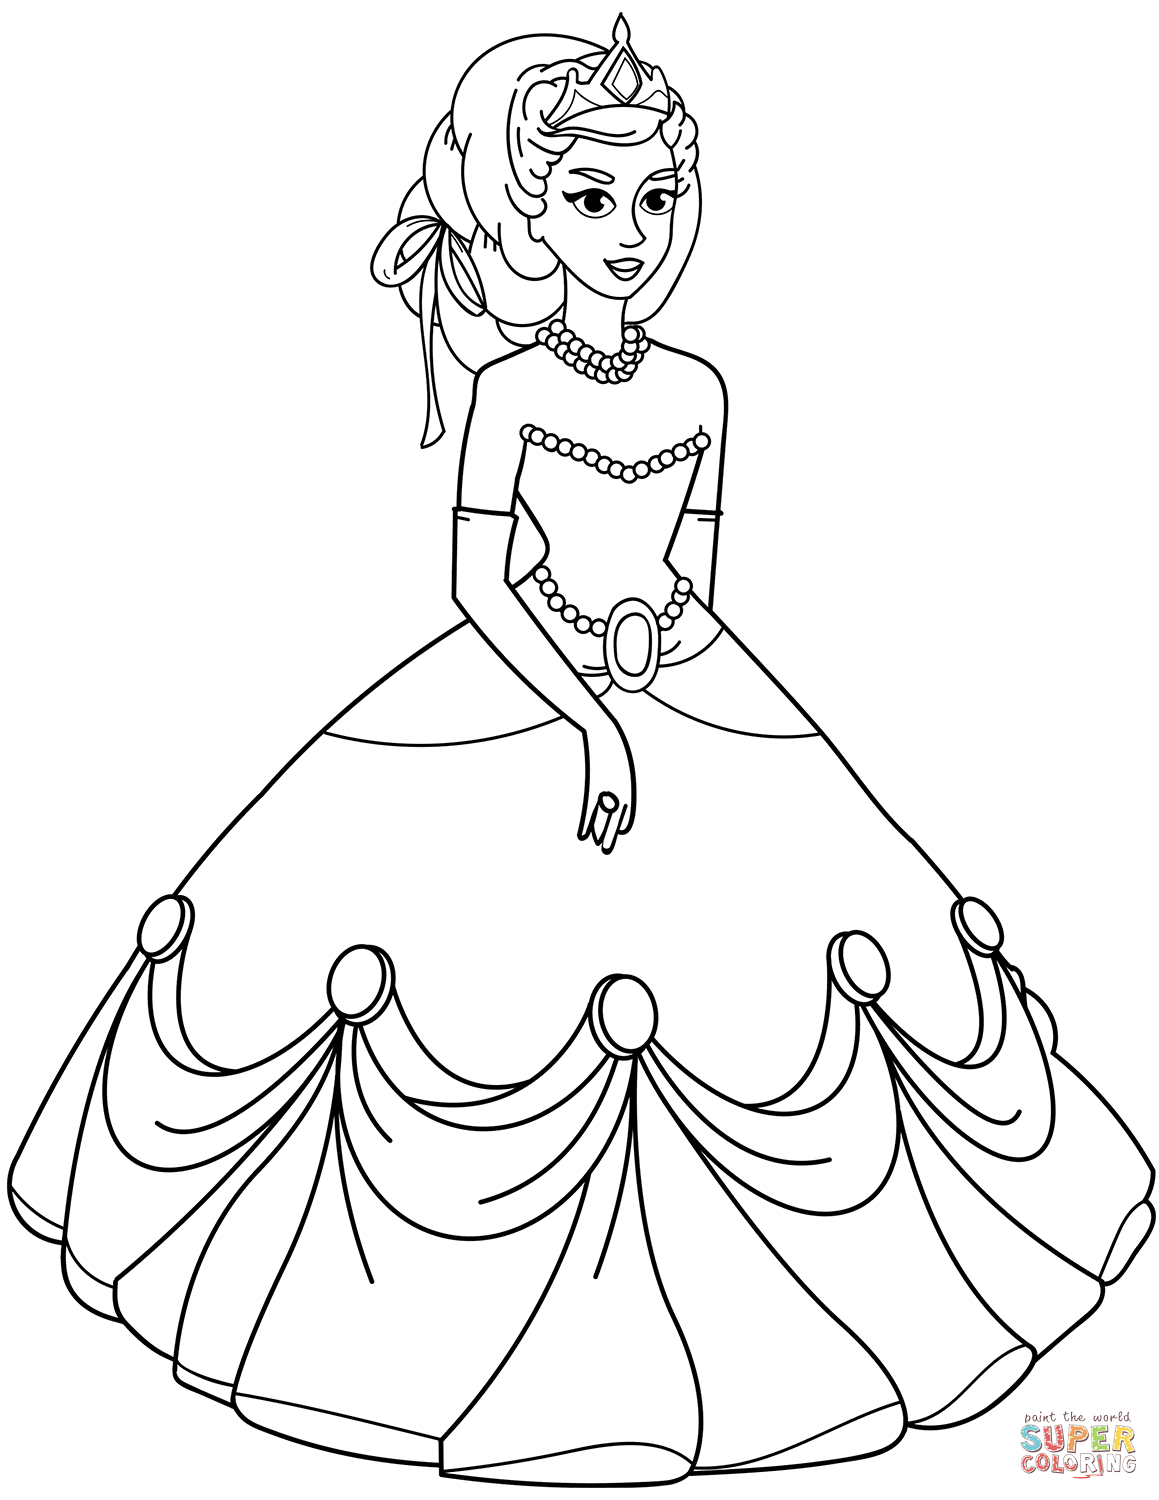 Princess in Ball Gown Dress coloring page | Free Printable Coloring Pages